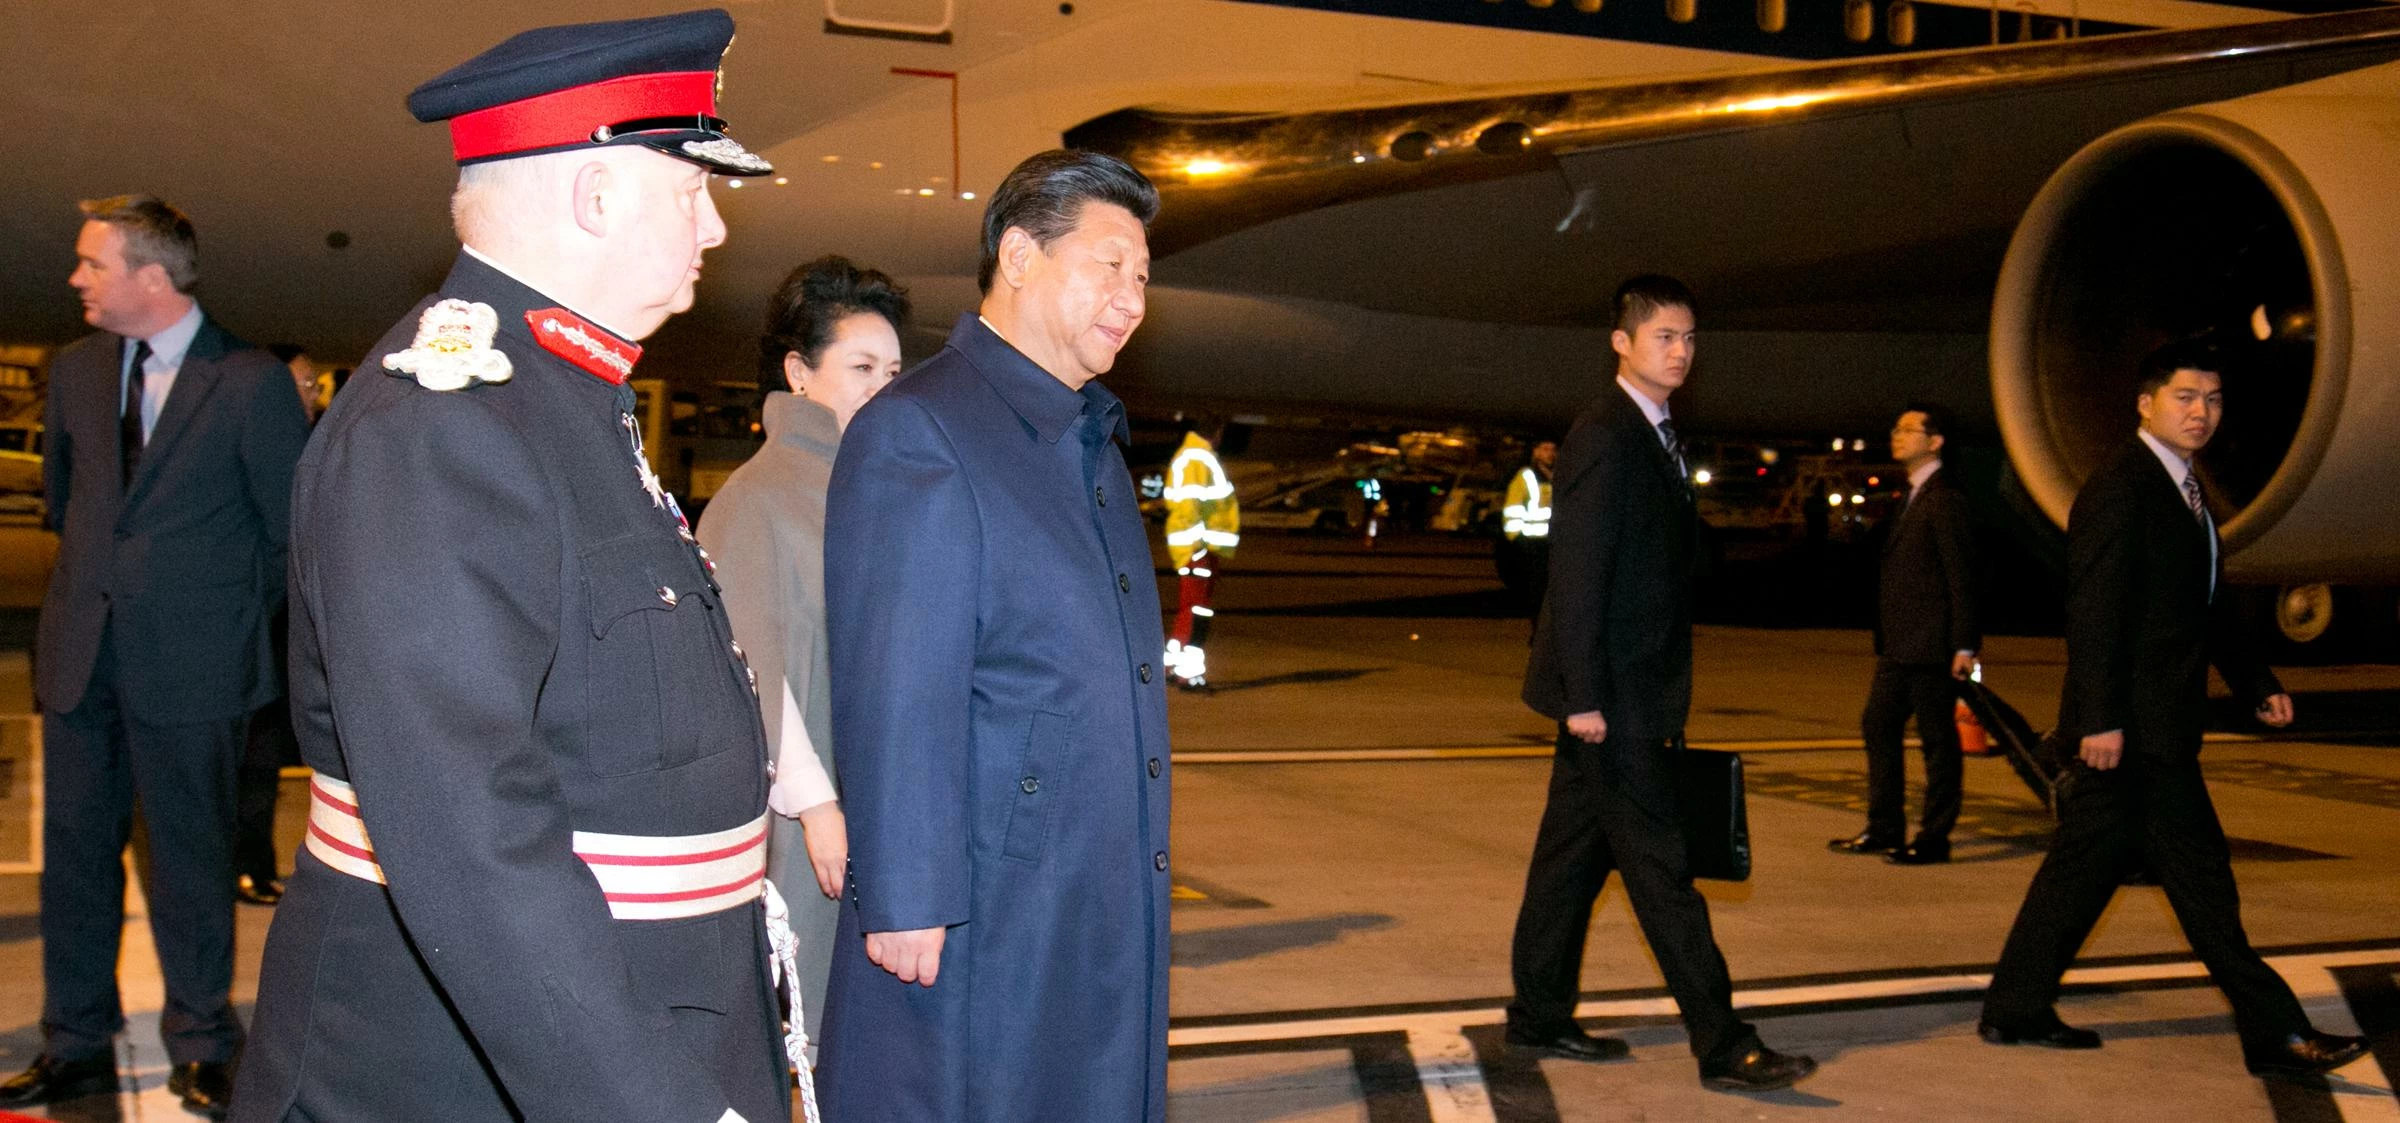 President Xi Jinping arriving at Manchester Airport